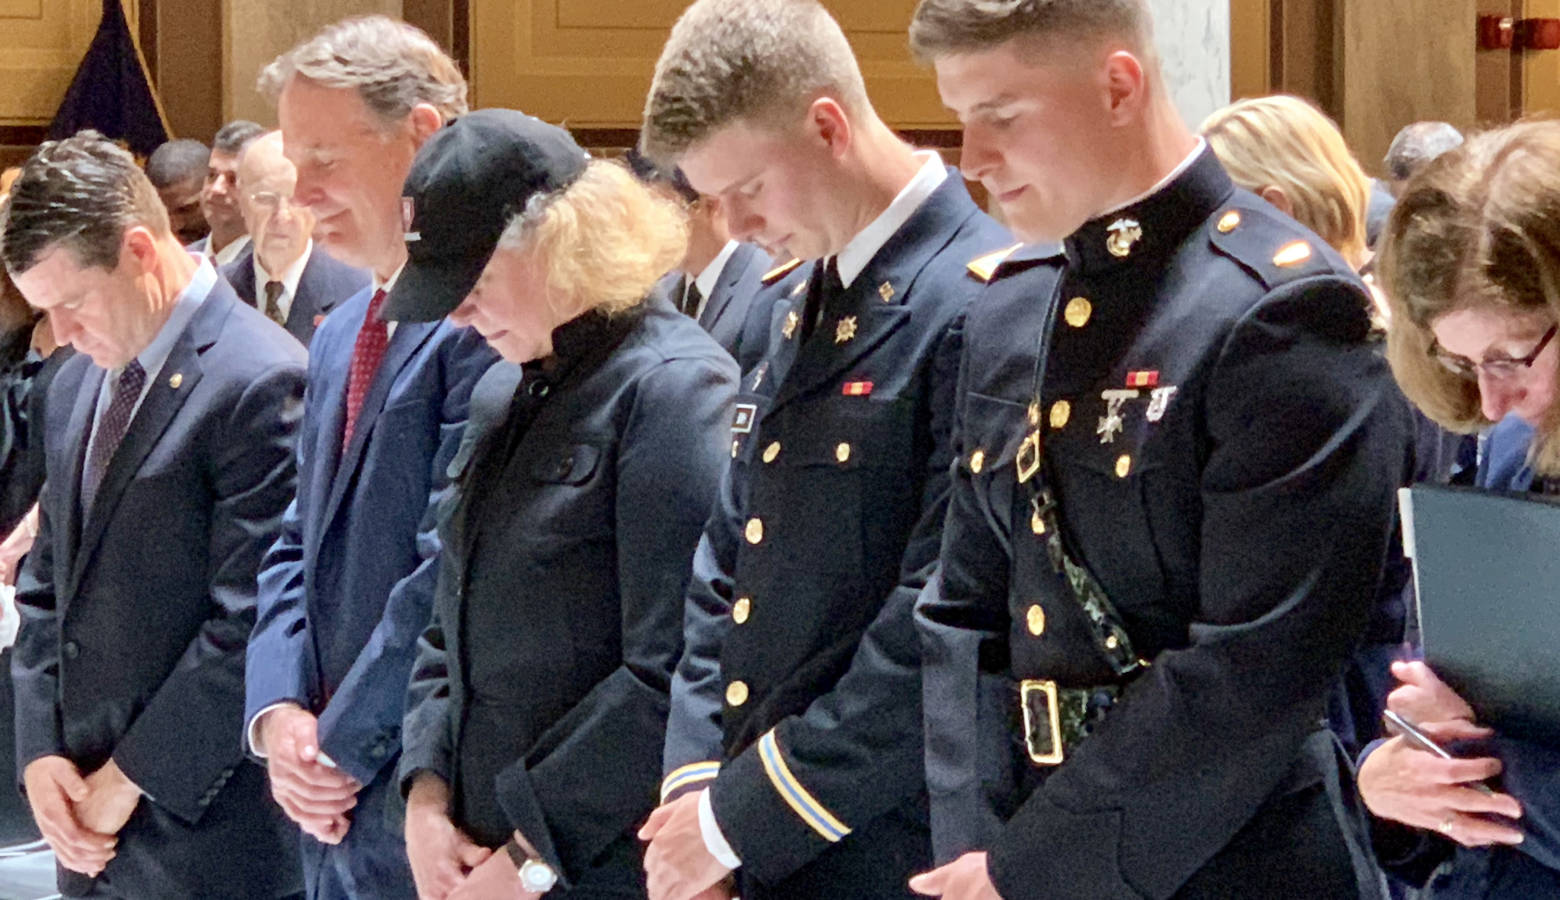 Evan Bayh, left, with his wife Susan and sons Nick and Beau at the Statehouse memorial for Evan's father, Birch Bayh. (Brandon Smith/IPB News)